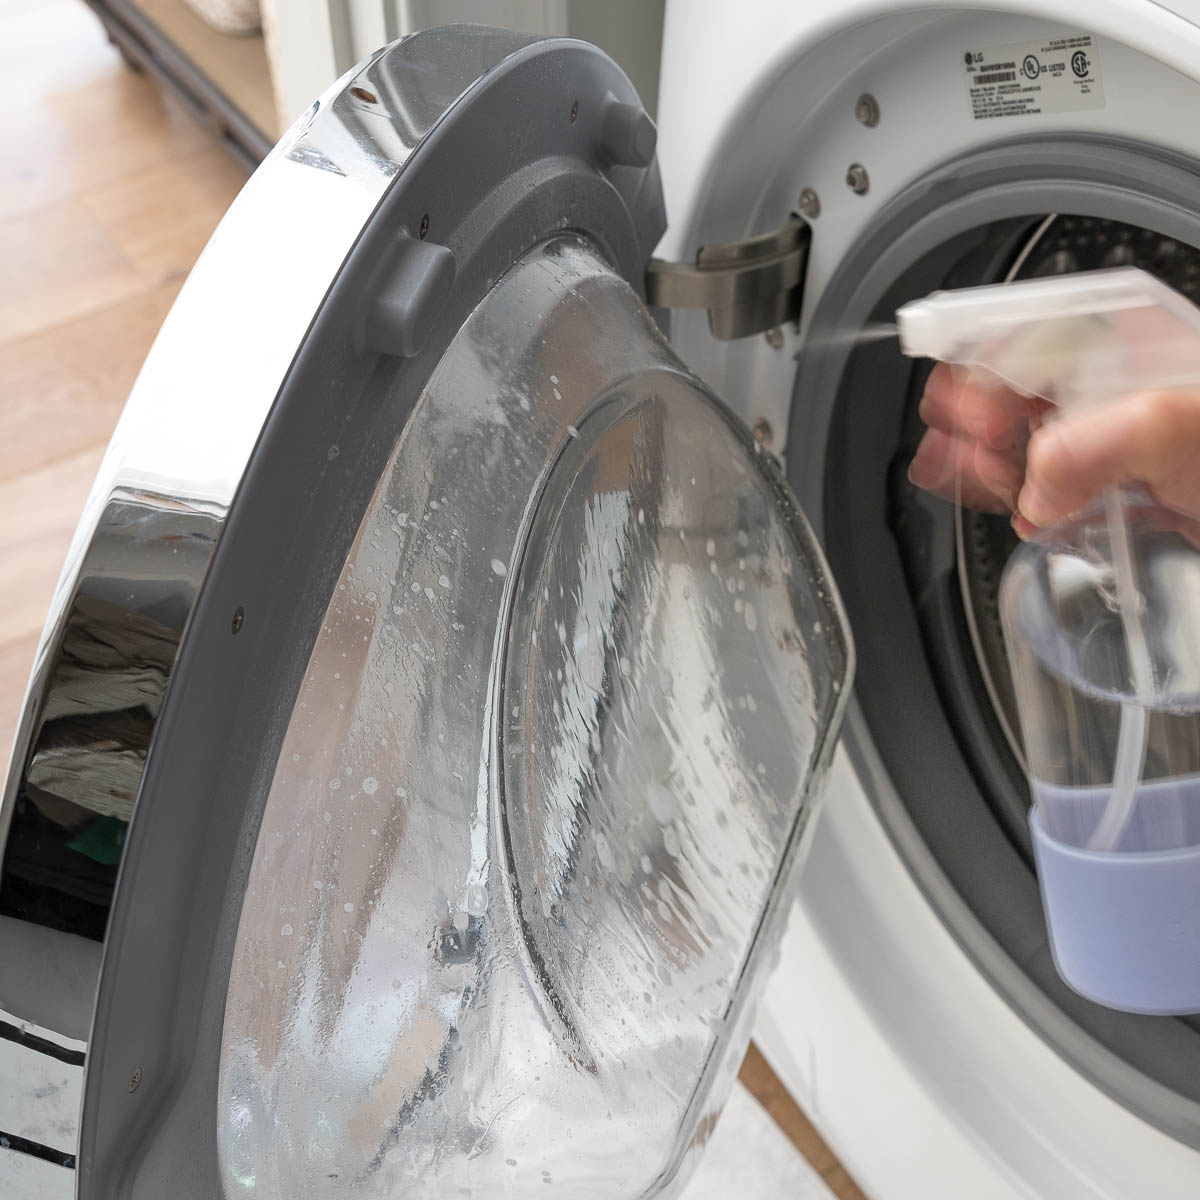 https://www.drivenbydecor.com/wp-content/uploads/2021/06/how-clean-washing-machine-featured-1.jpg